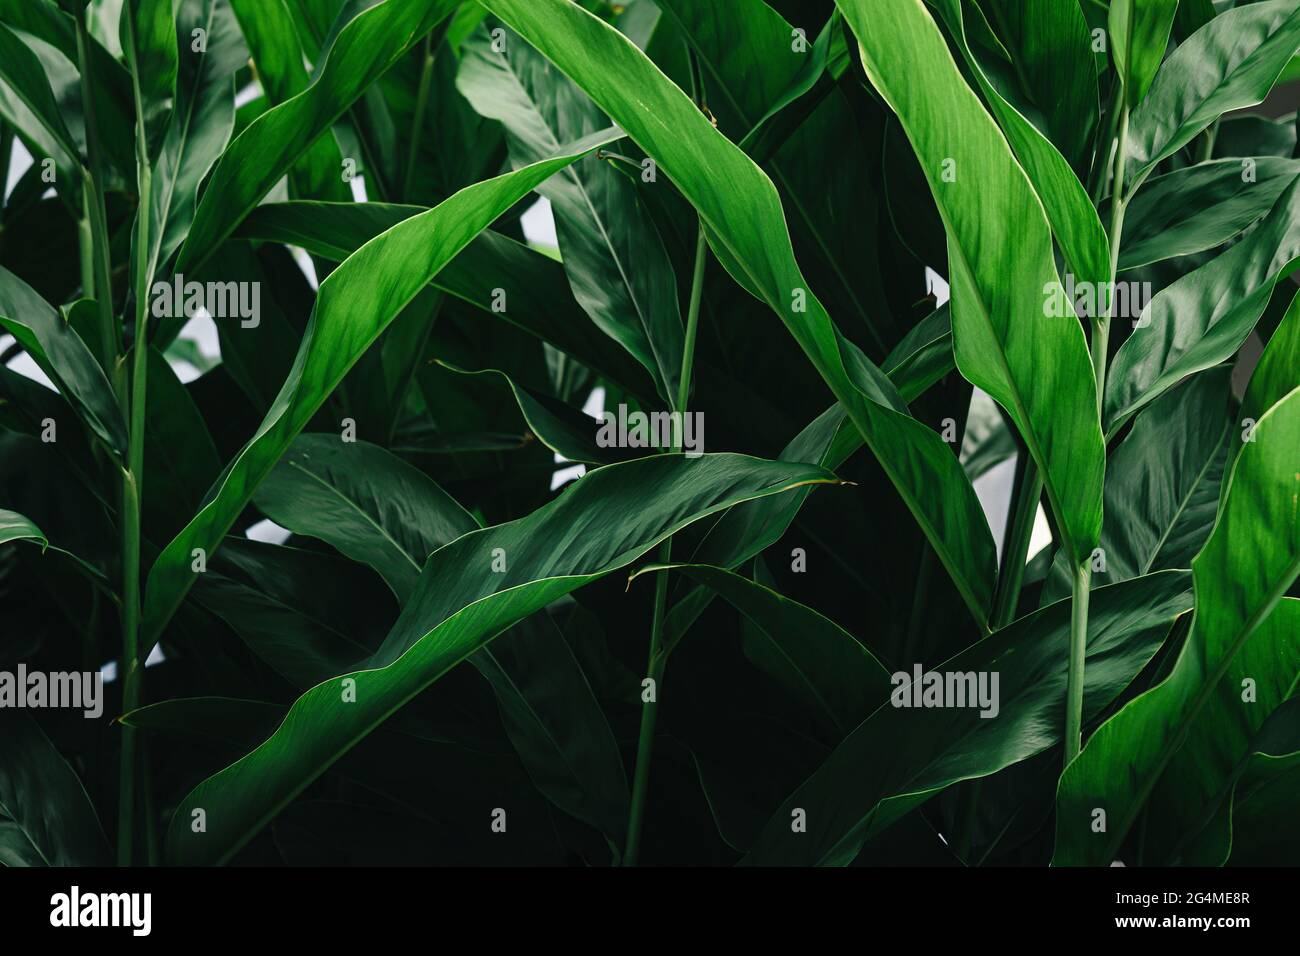 Fresh long green leaves growth background Stock Photo